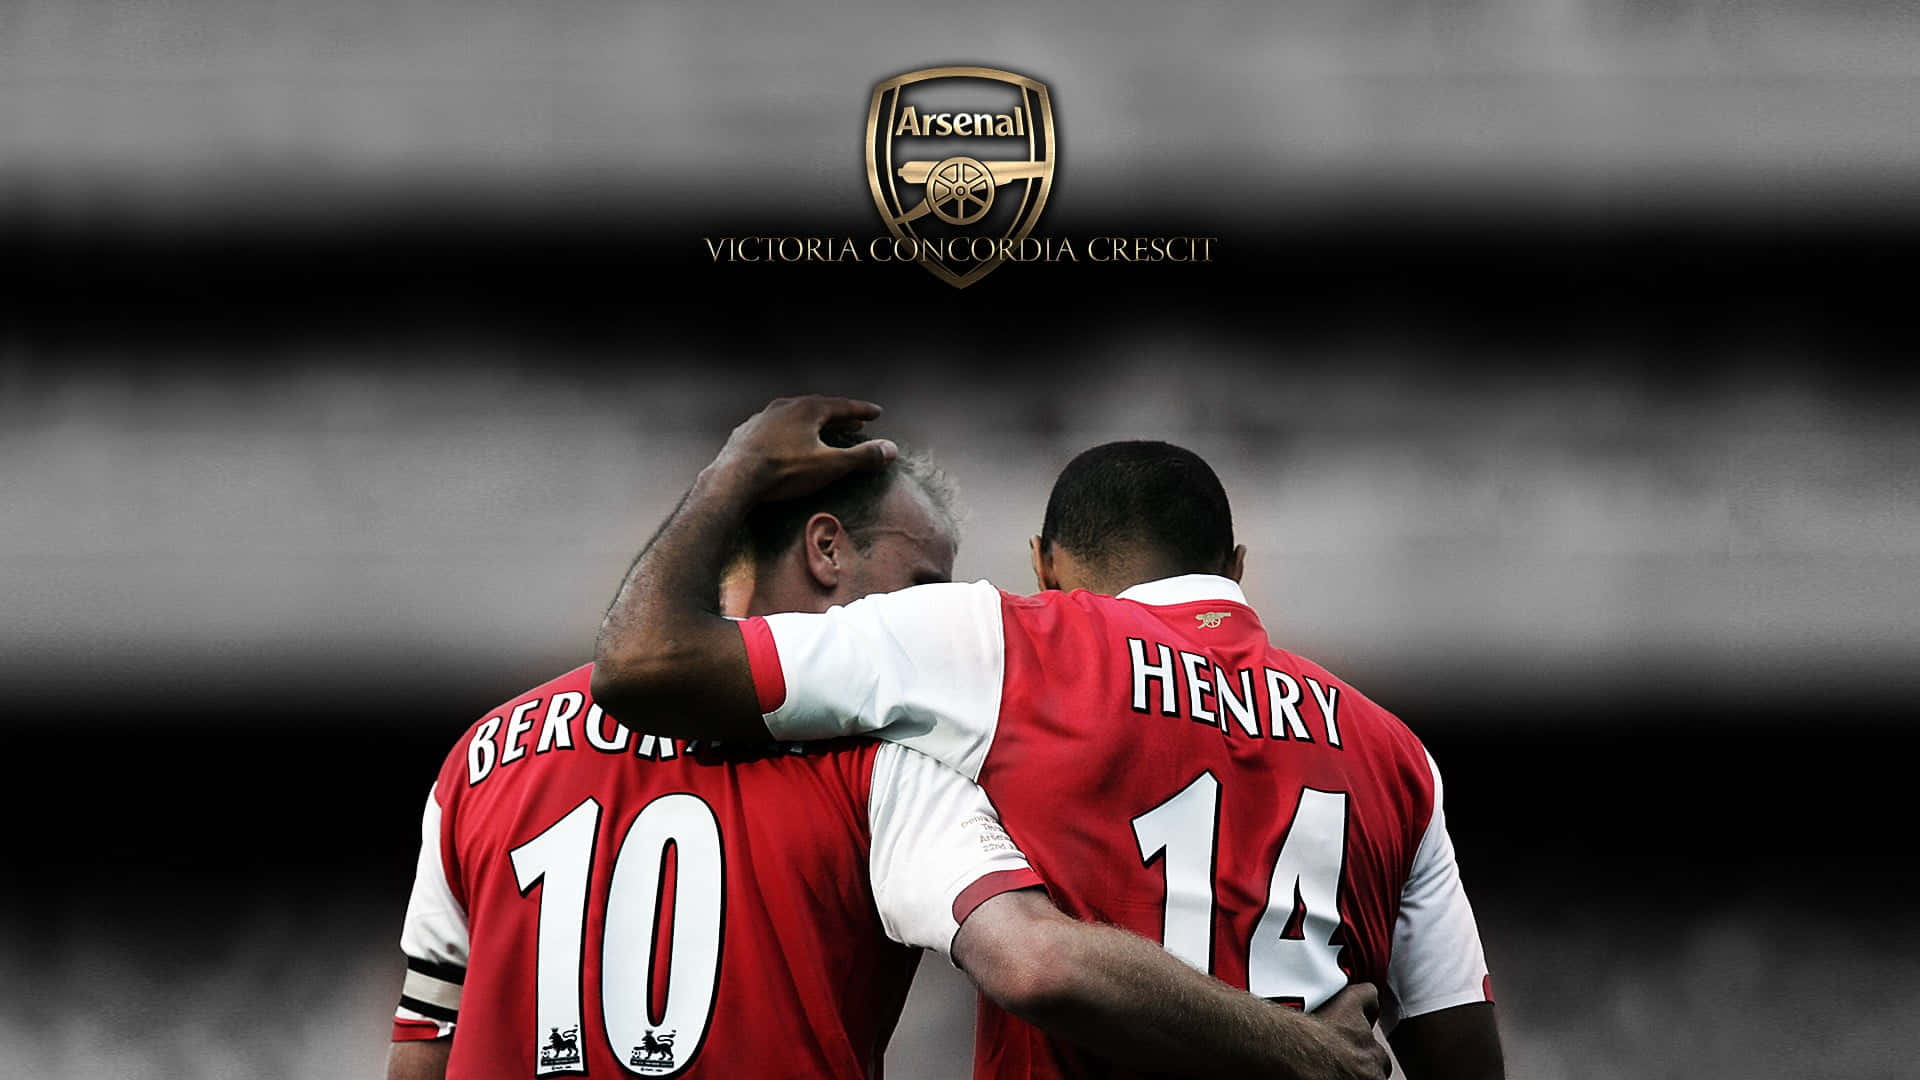 Dennis Bergkamp Tapping Head Thierry Henry Wallpaper